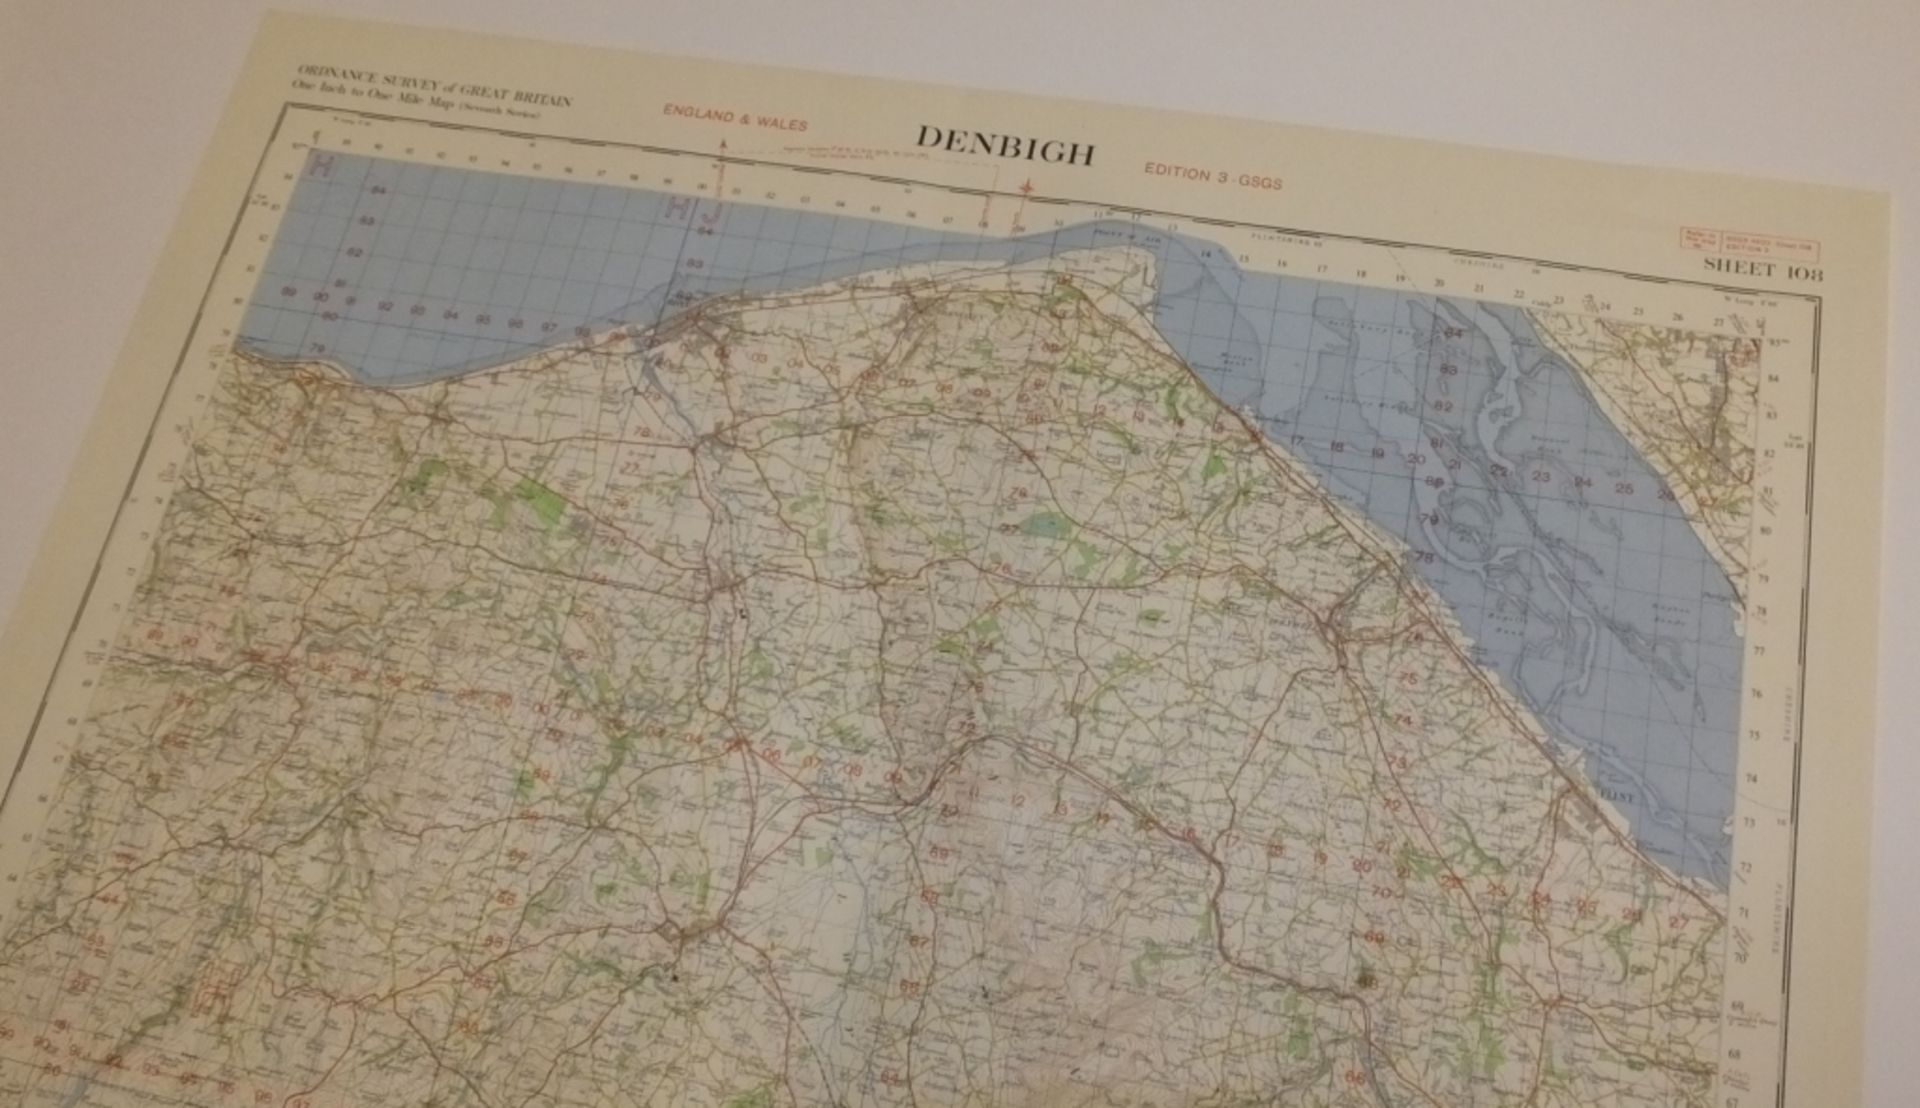 27x ENGLAND & WALES MAP DENBIGH 1INCH 1MILE 1955 3RD EDITION 3 GSGS SHEET 108 - Image 2 of 4